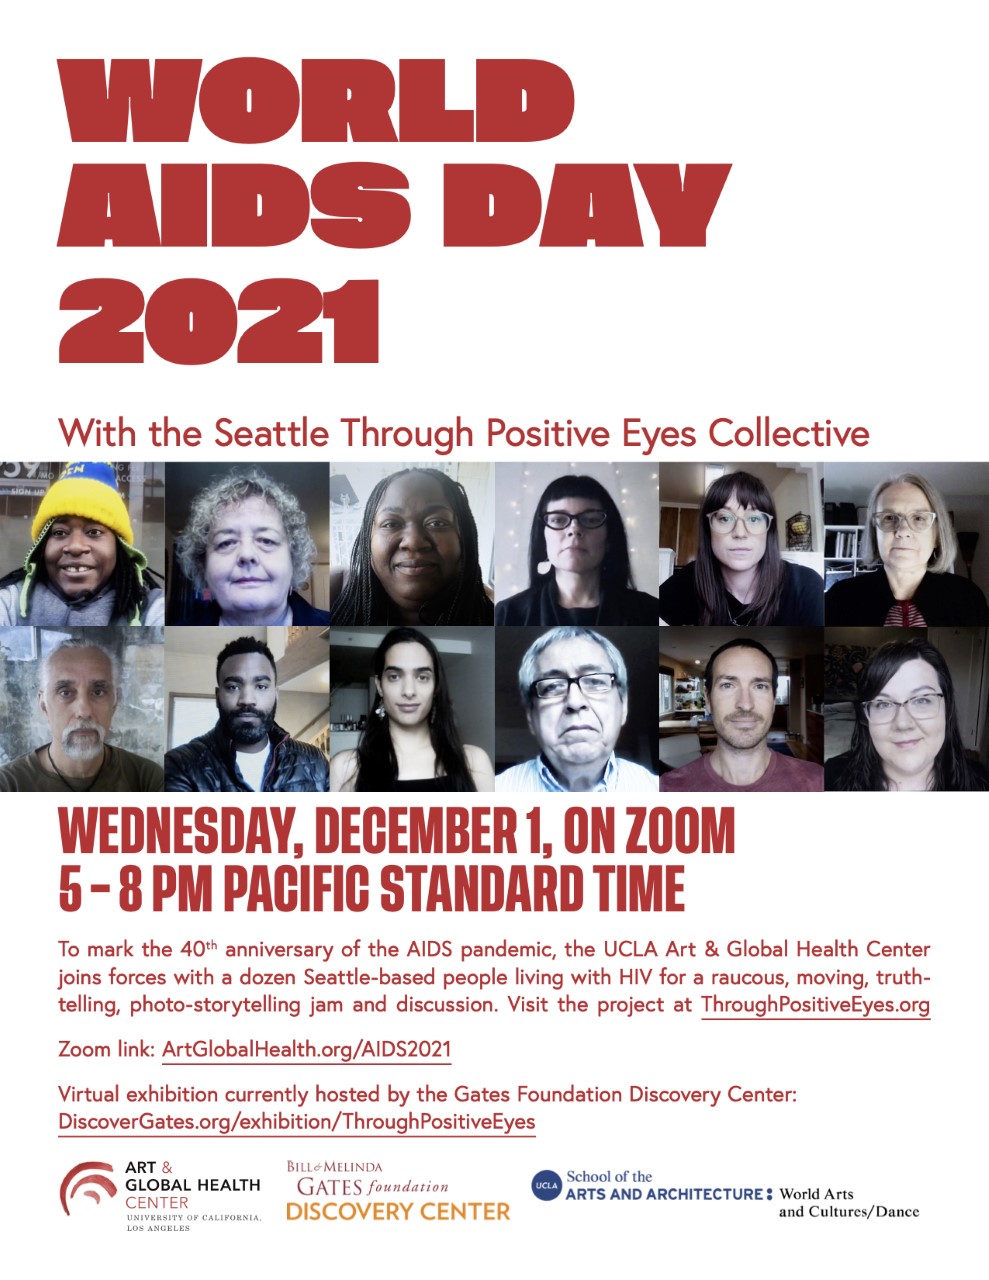 WORLD AIDS DAY 2021 With the Seattle Through Positive Eyes Collective